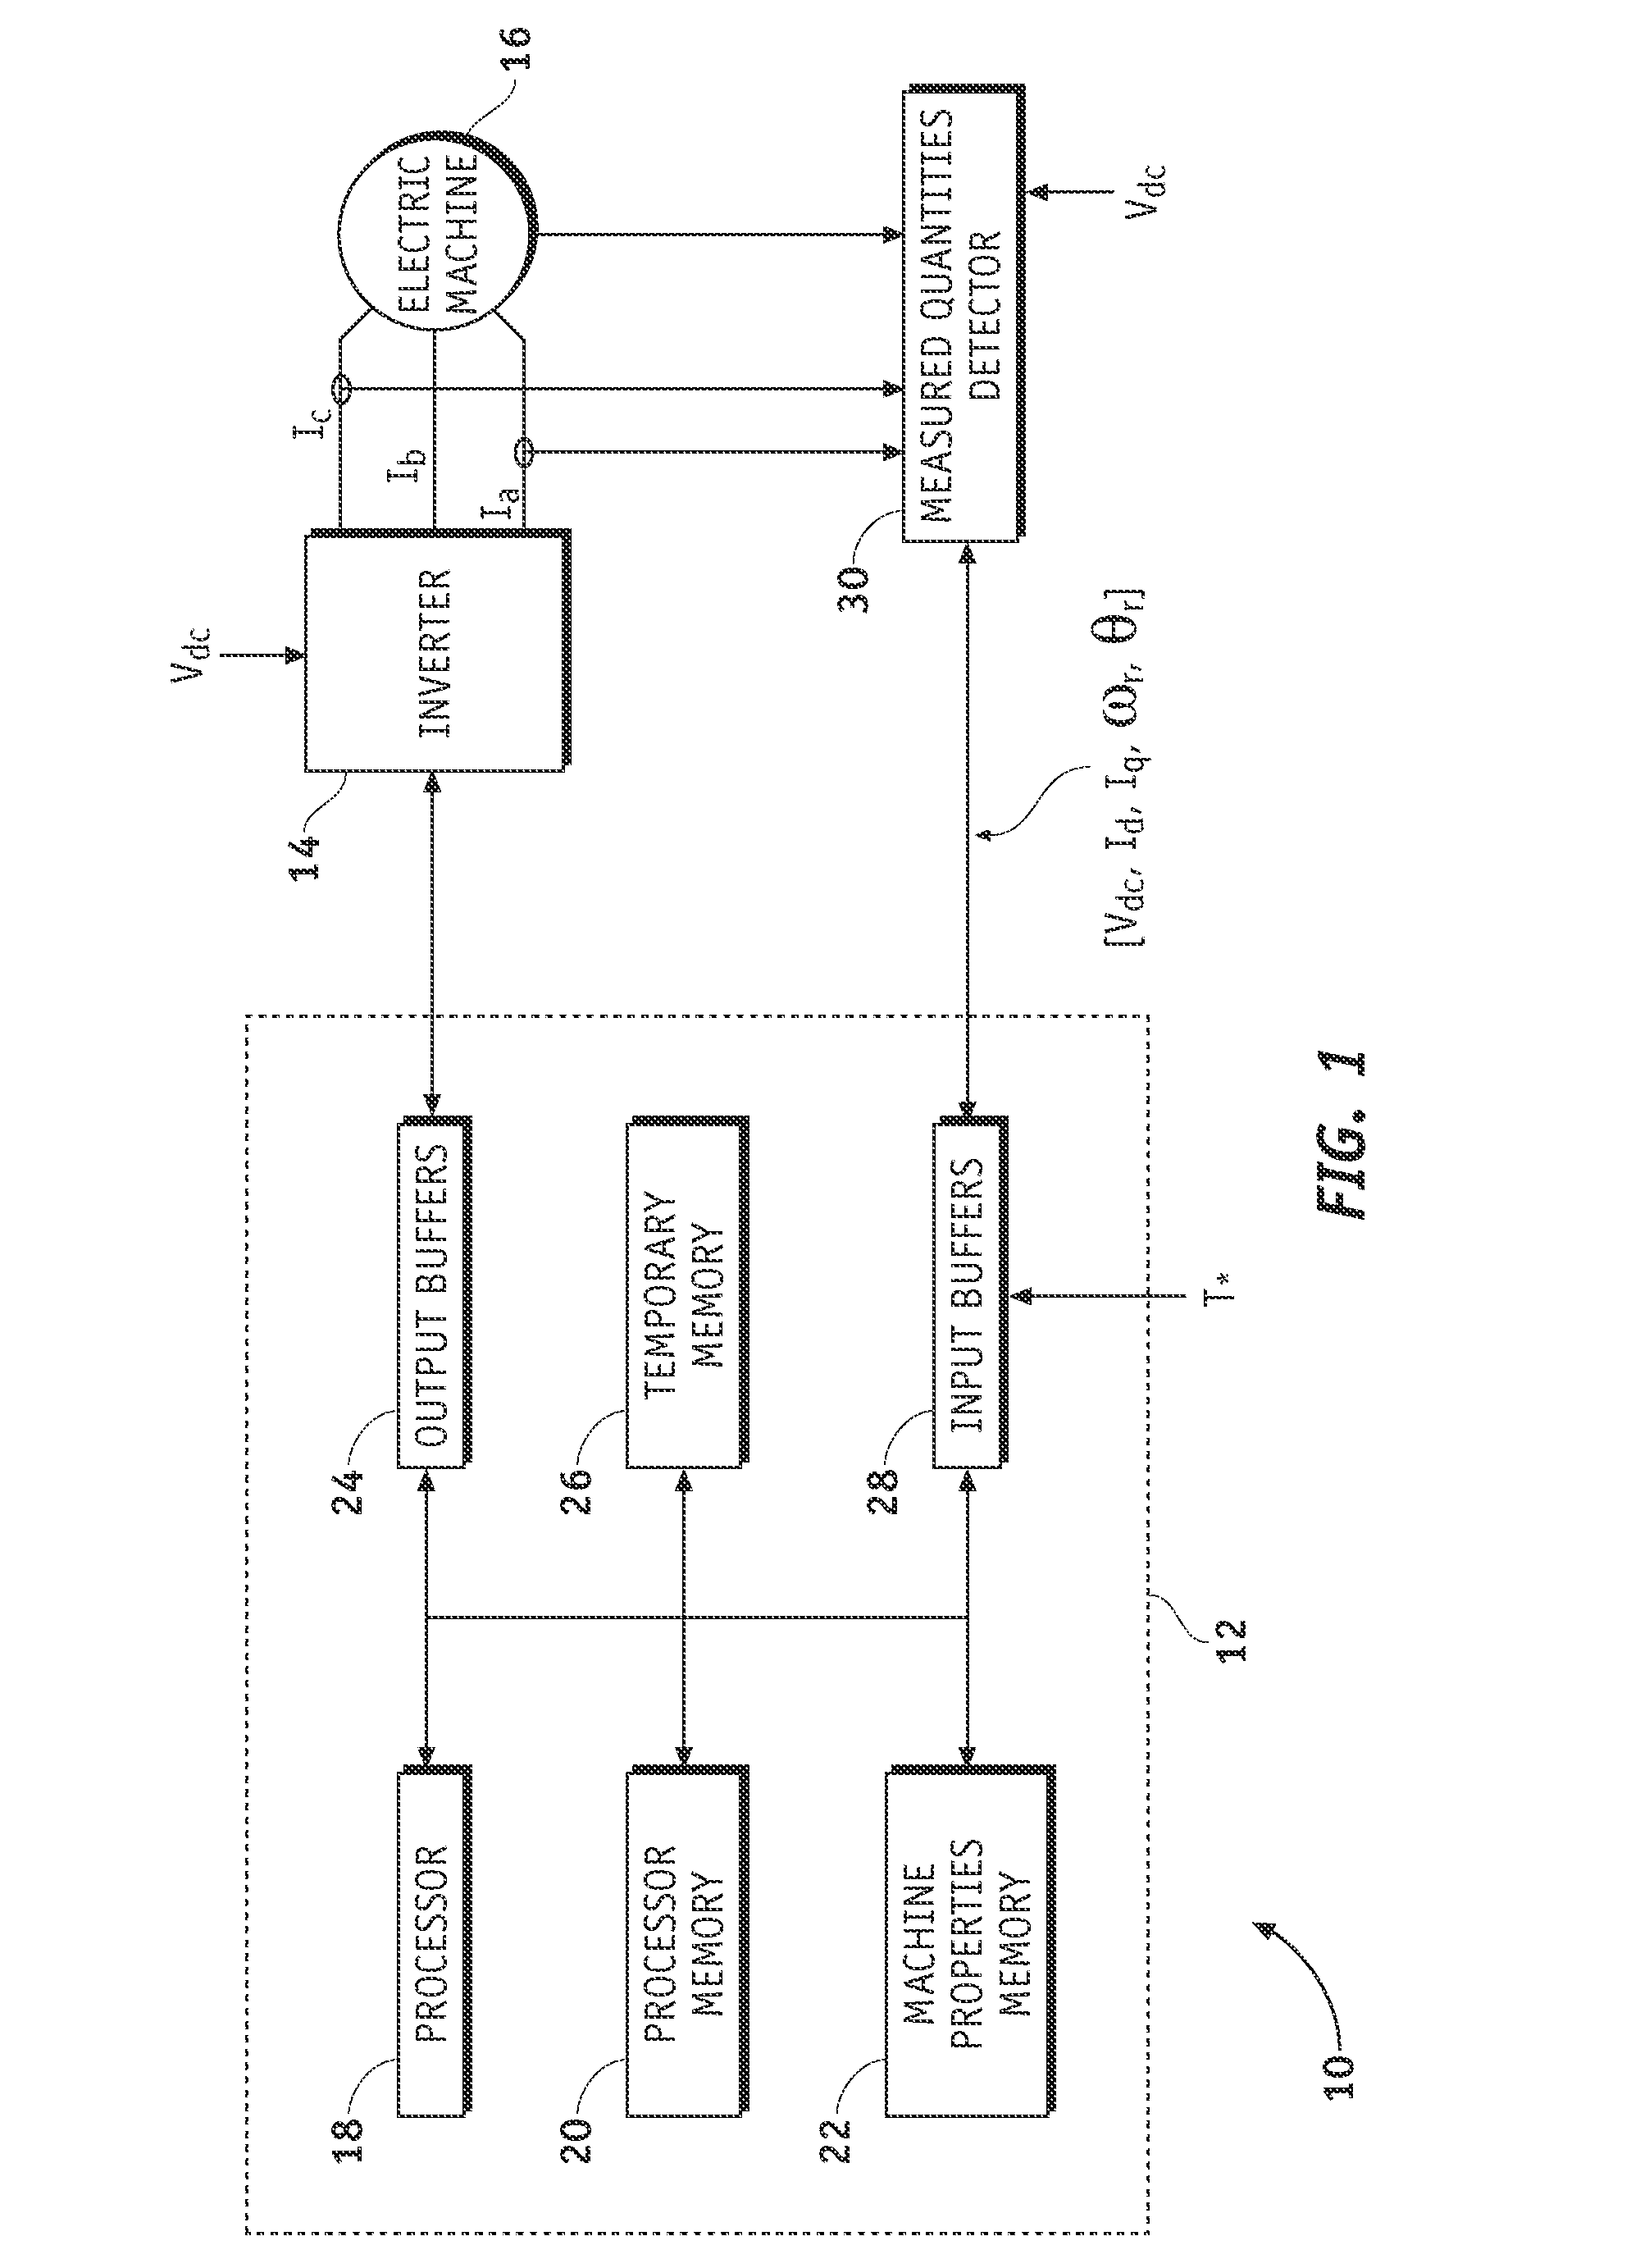 Method and system for controlling permanent magnet ac machines